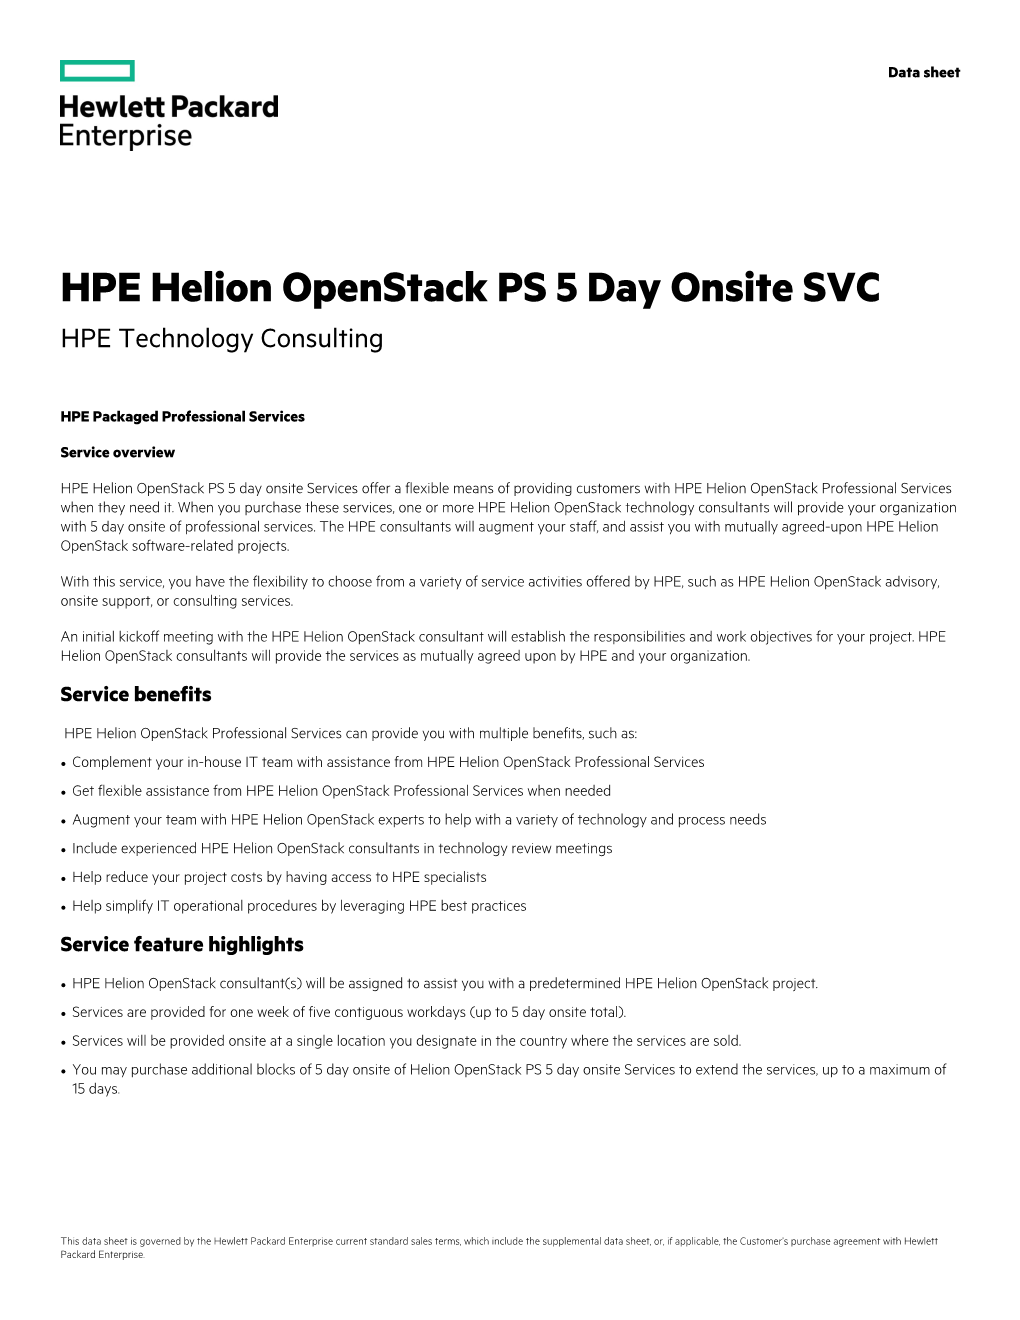 HPE Helion Openstack PS 5 Day Onsite SVC HPE Technology Consulting